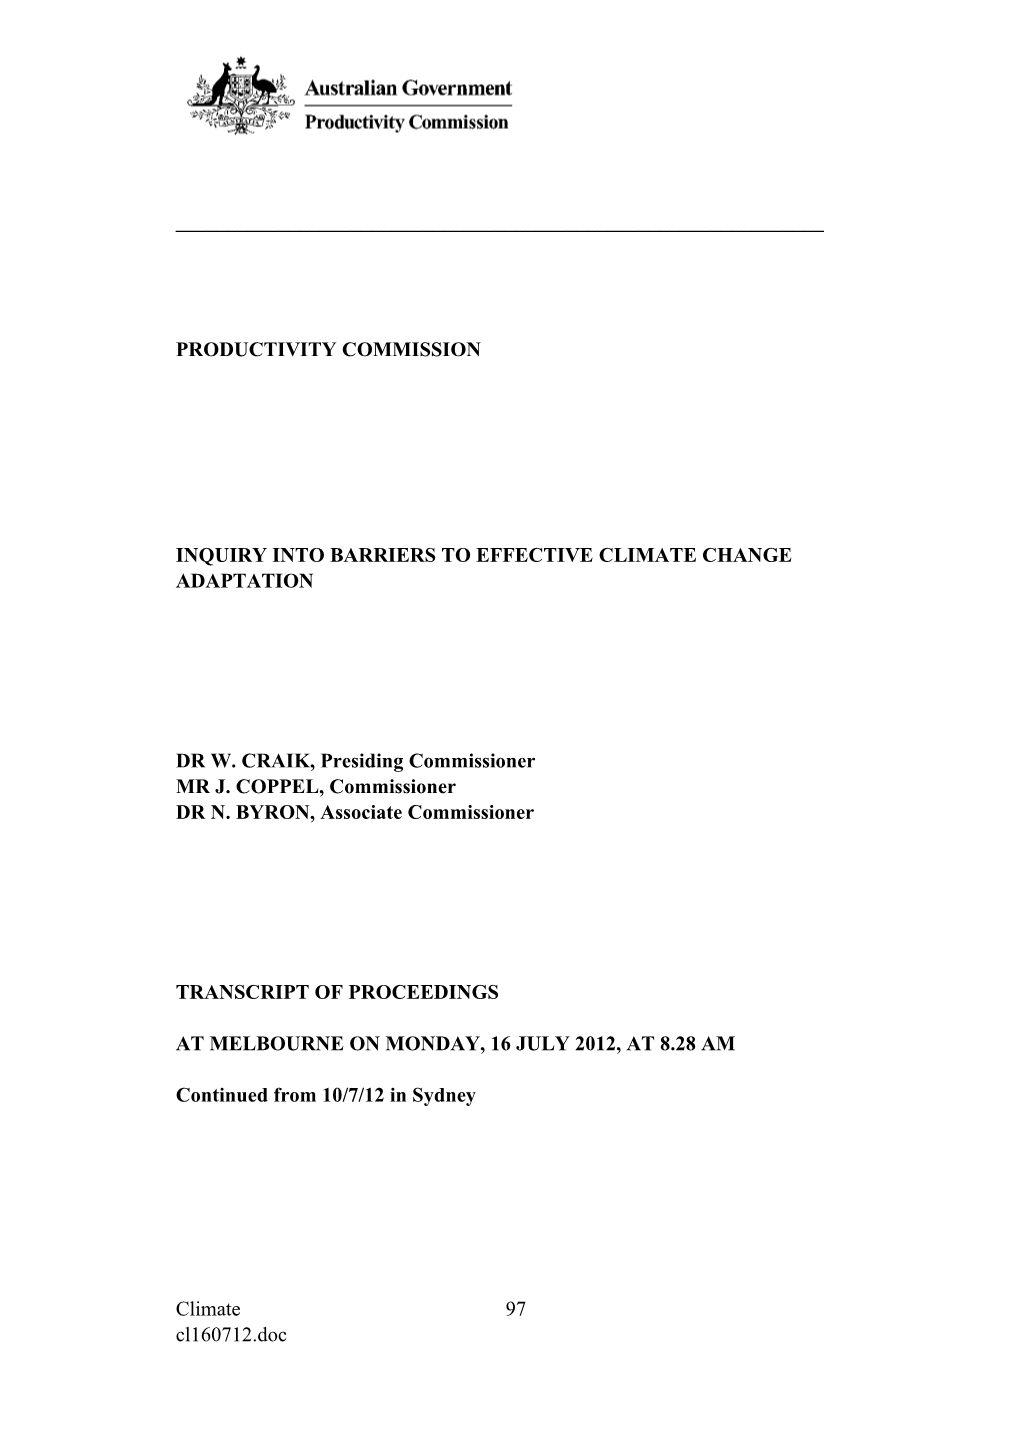 16 July 2012 - Melbourne Public Hearing Transcript - Barriers to Effective Climate Change